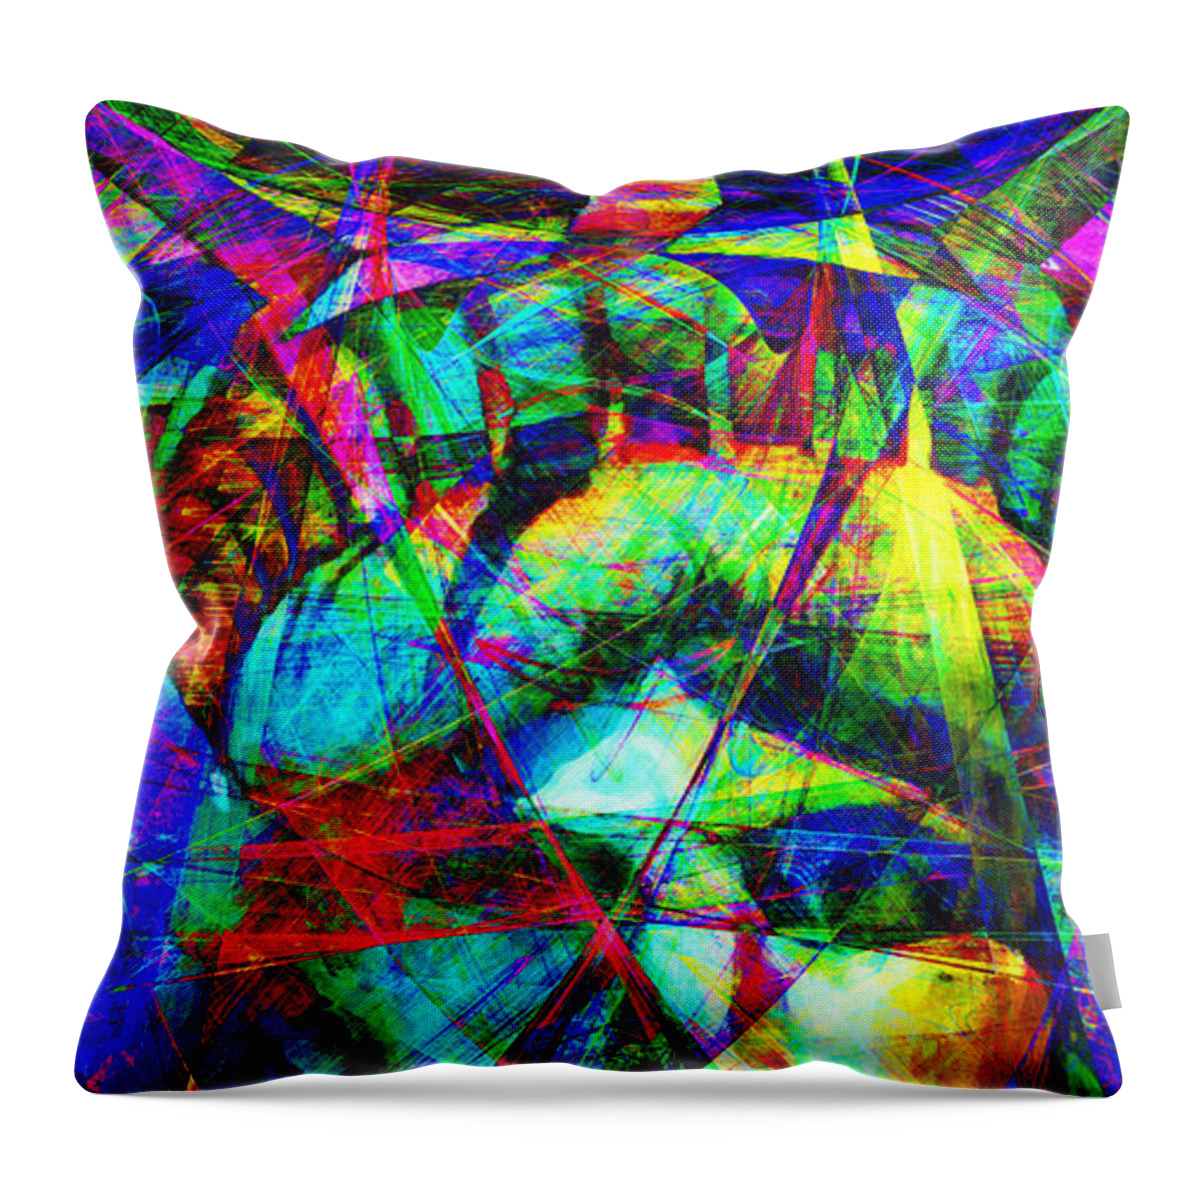 Patriotic Throw Pillow featuring the photograph Liberty Head Abstract 20130618 Long by Wingsdomain Art and Photography